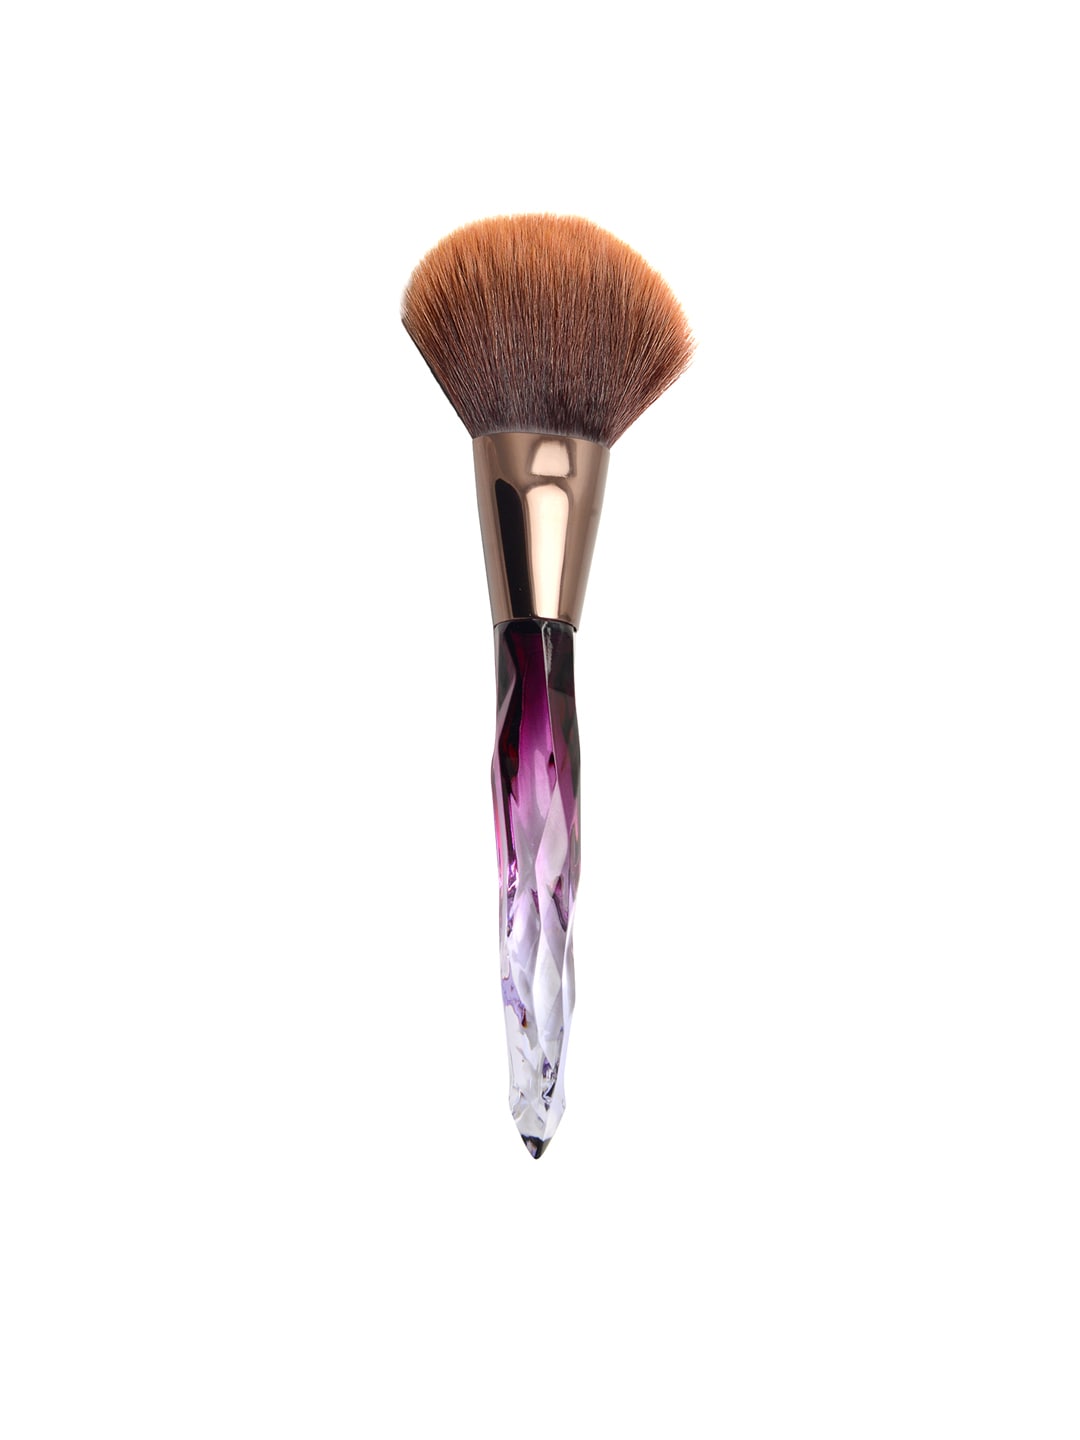 INCOLOR Exposed Makeup Powder Brush 01 Price in India